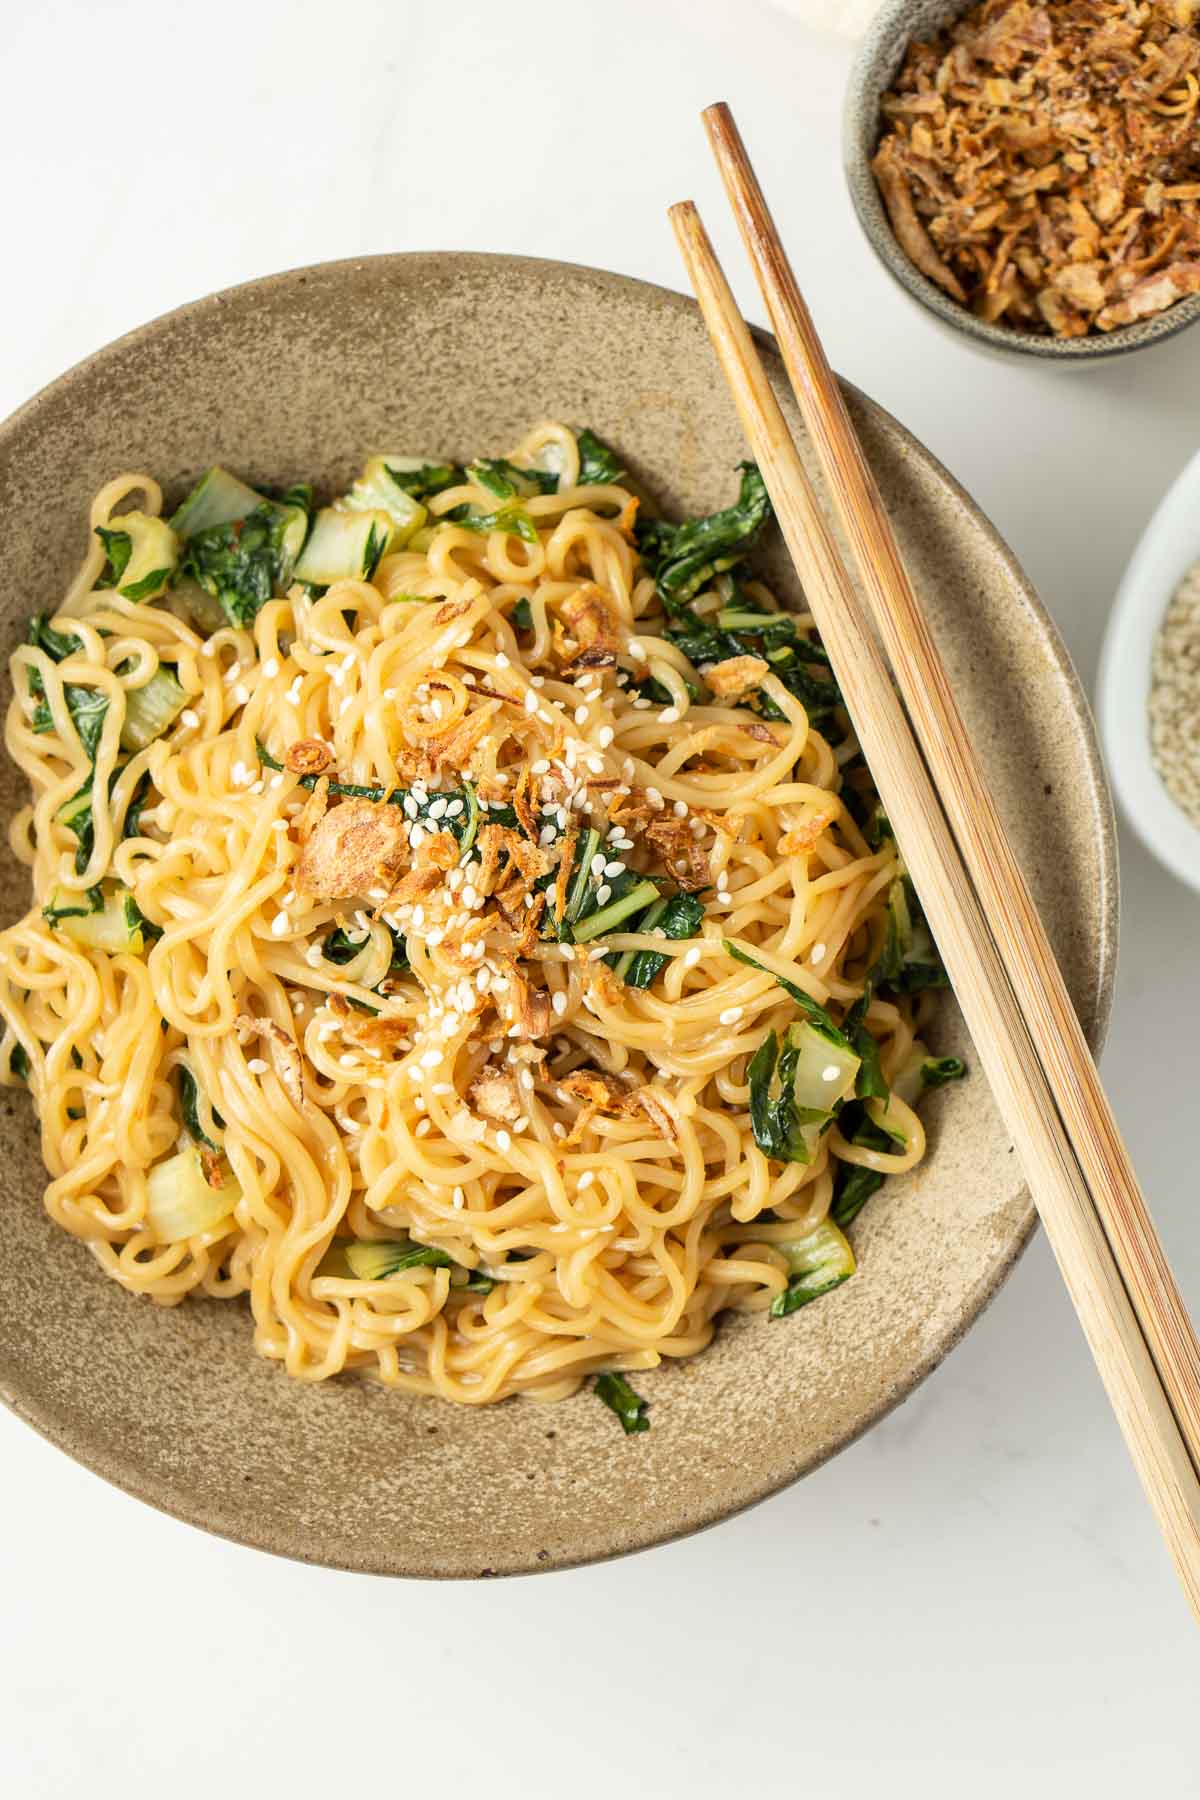 Sweet and spicy noodles in a bowl ready to eat.